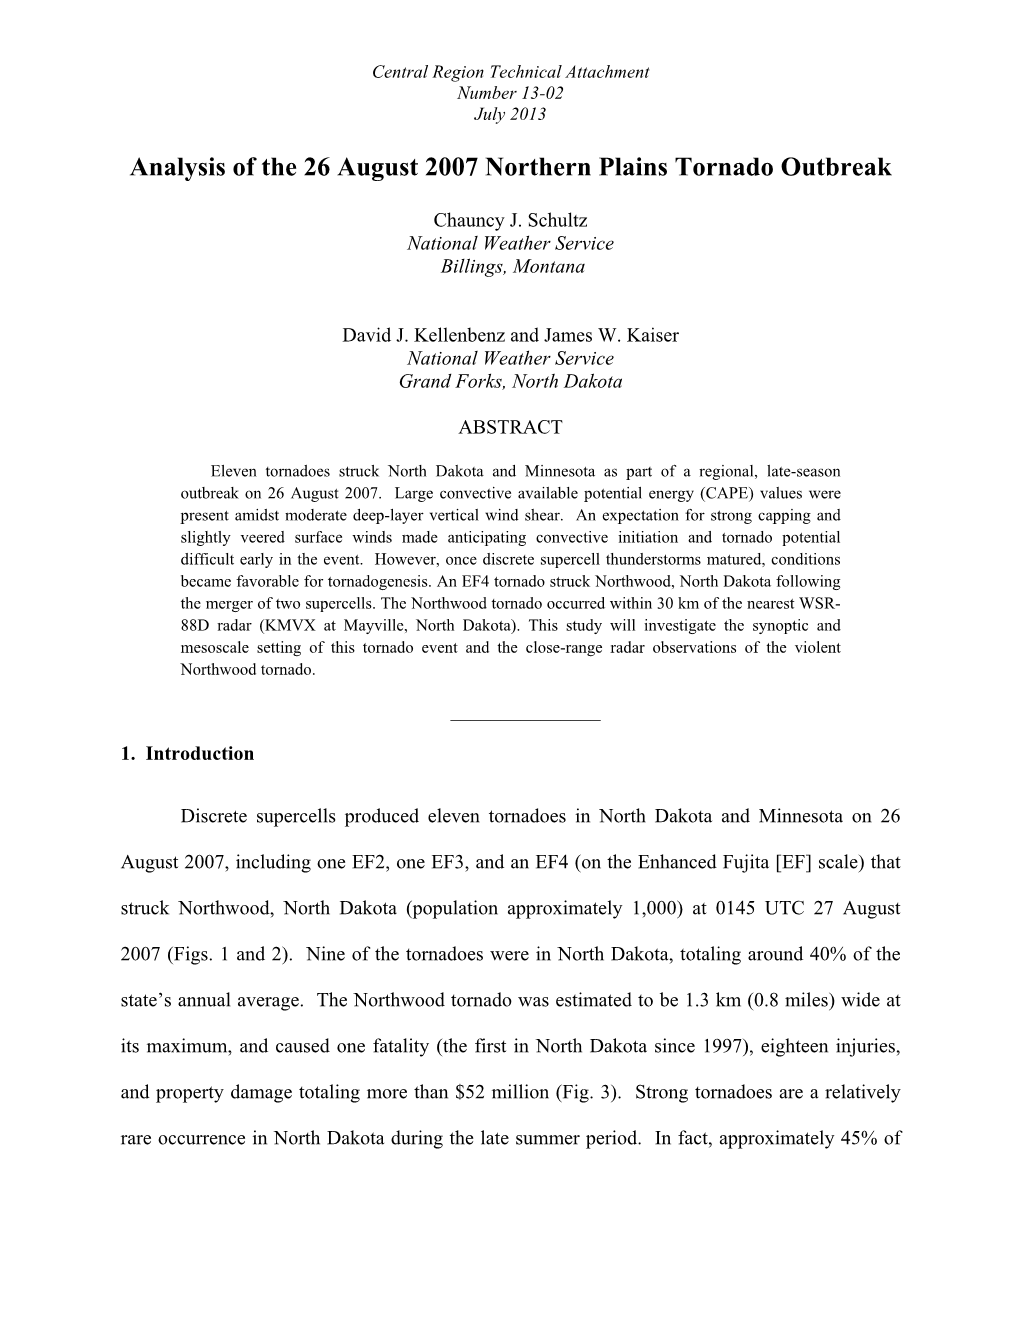 Analysis of the 26 August 2007 Northern Plains Tornado Outbreak